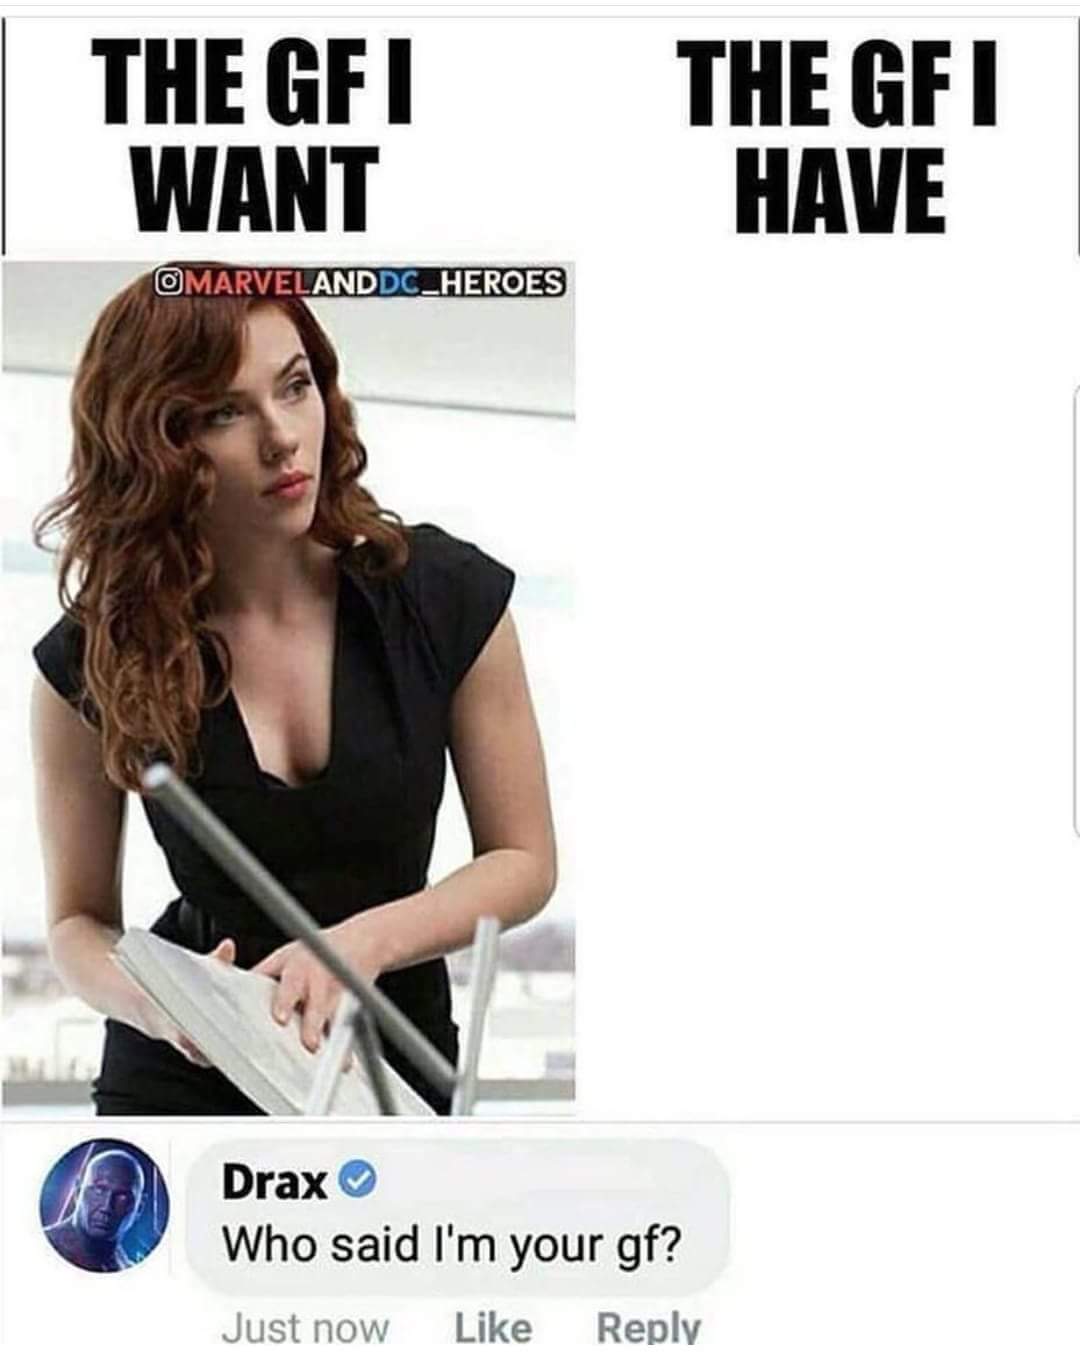 drax girlfriend meme - The Gfi Want The Gfi Have OMARVELANDDC_HEROES Drax Who said I'm your gf? Just now